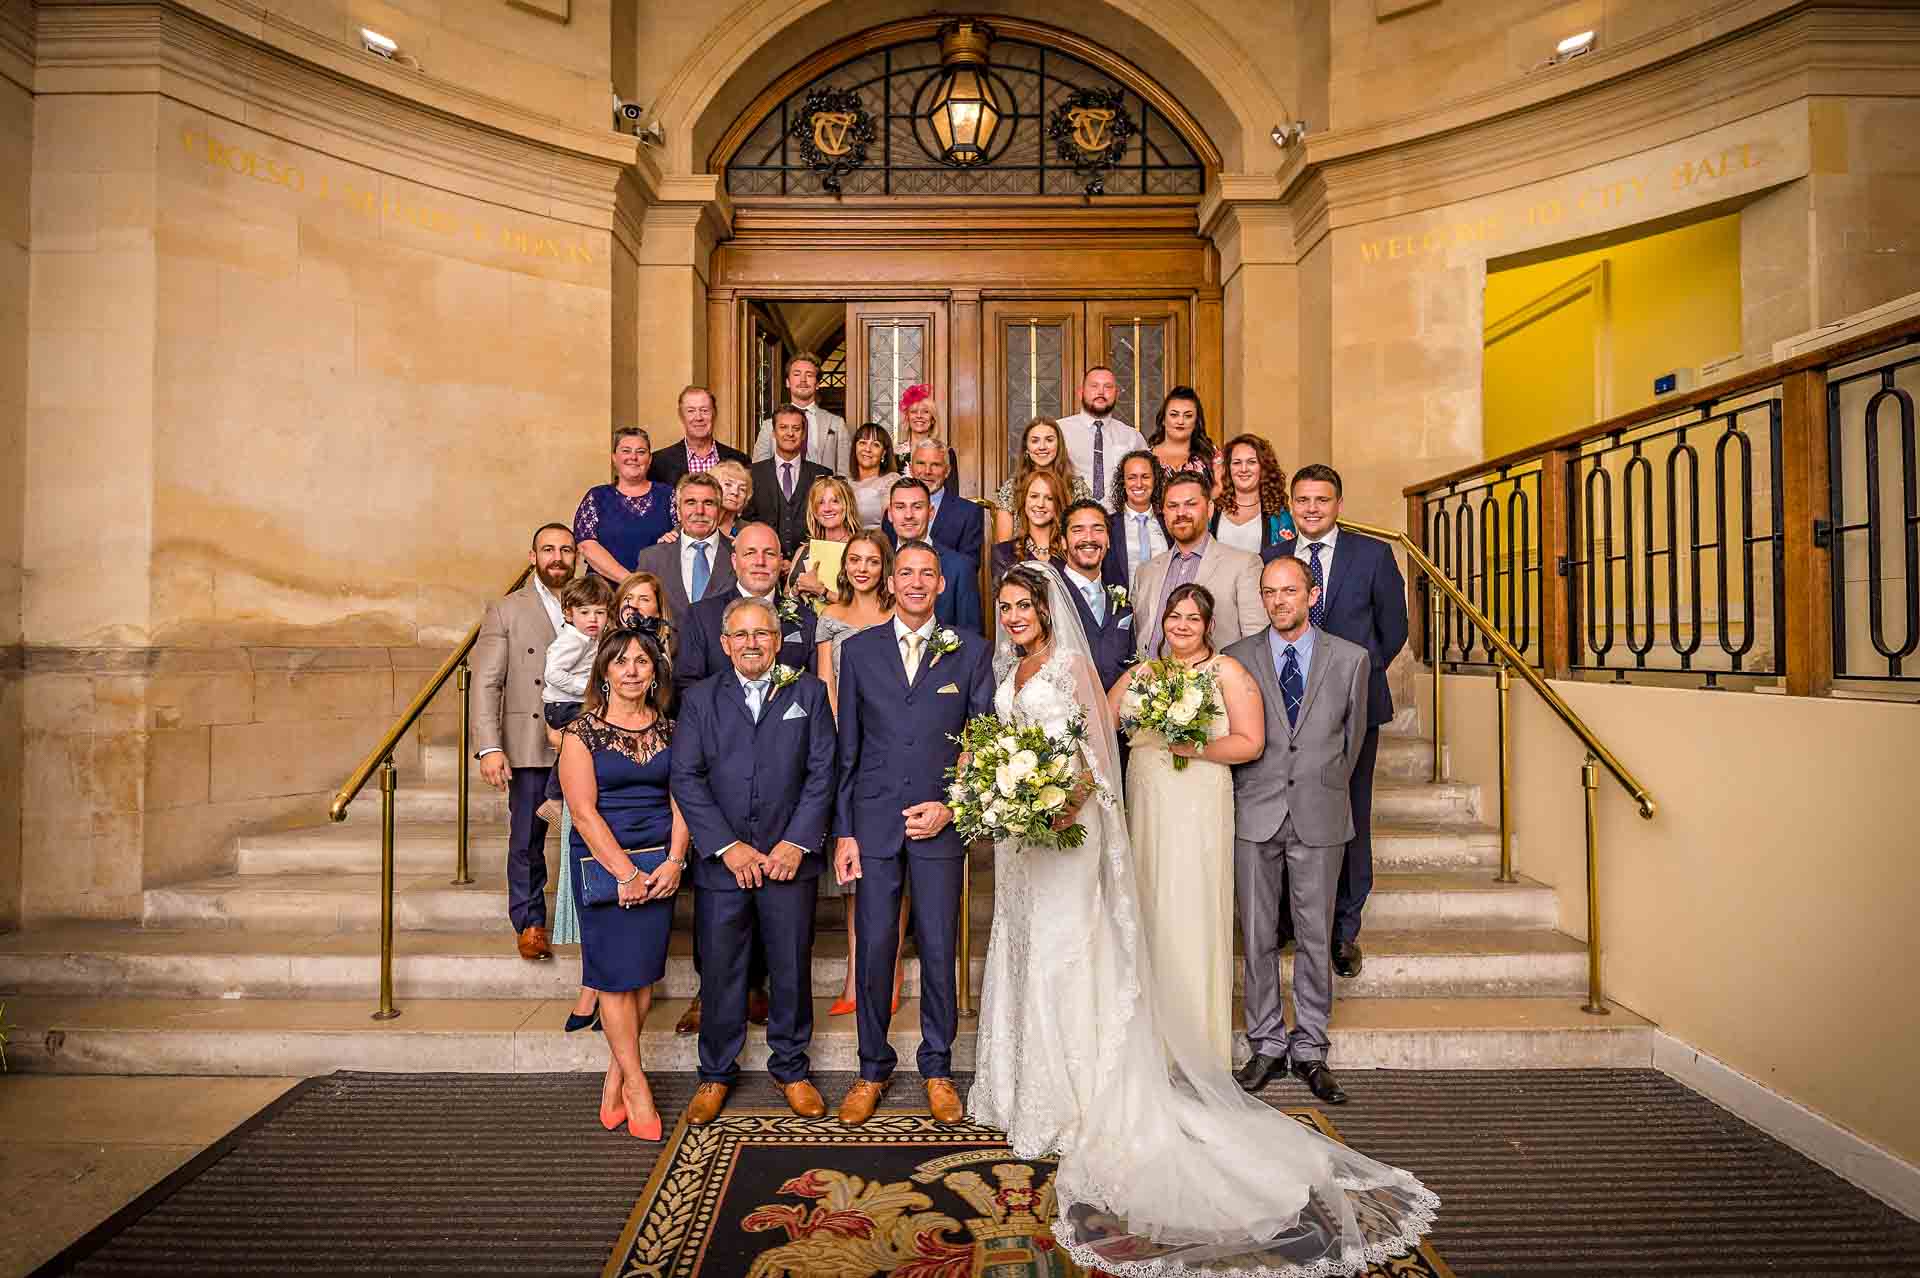 Group wedding portrait taken in entrance hall of Cardiff City Hall